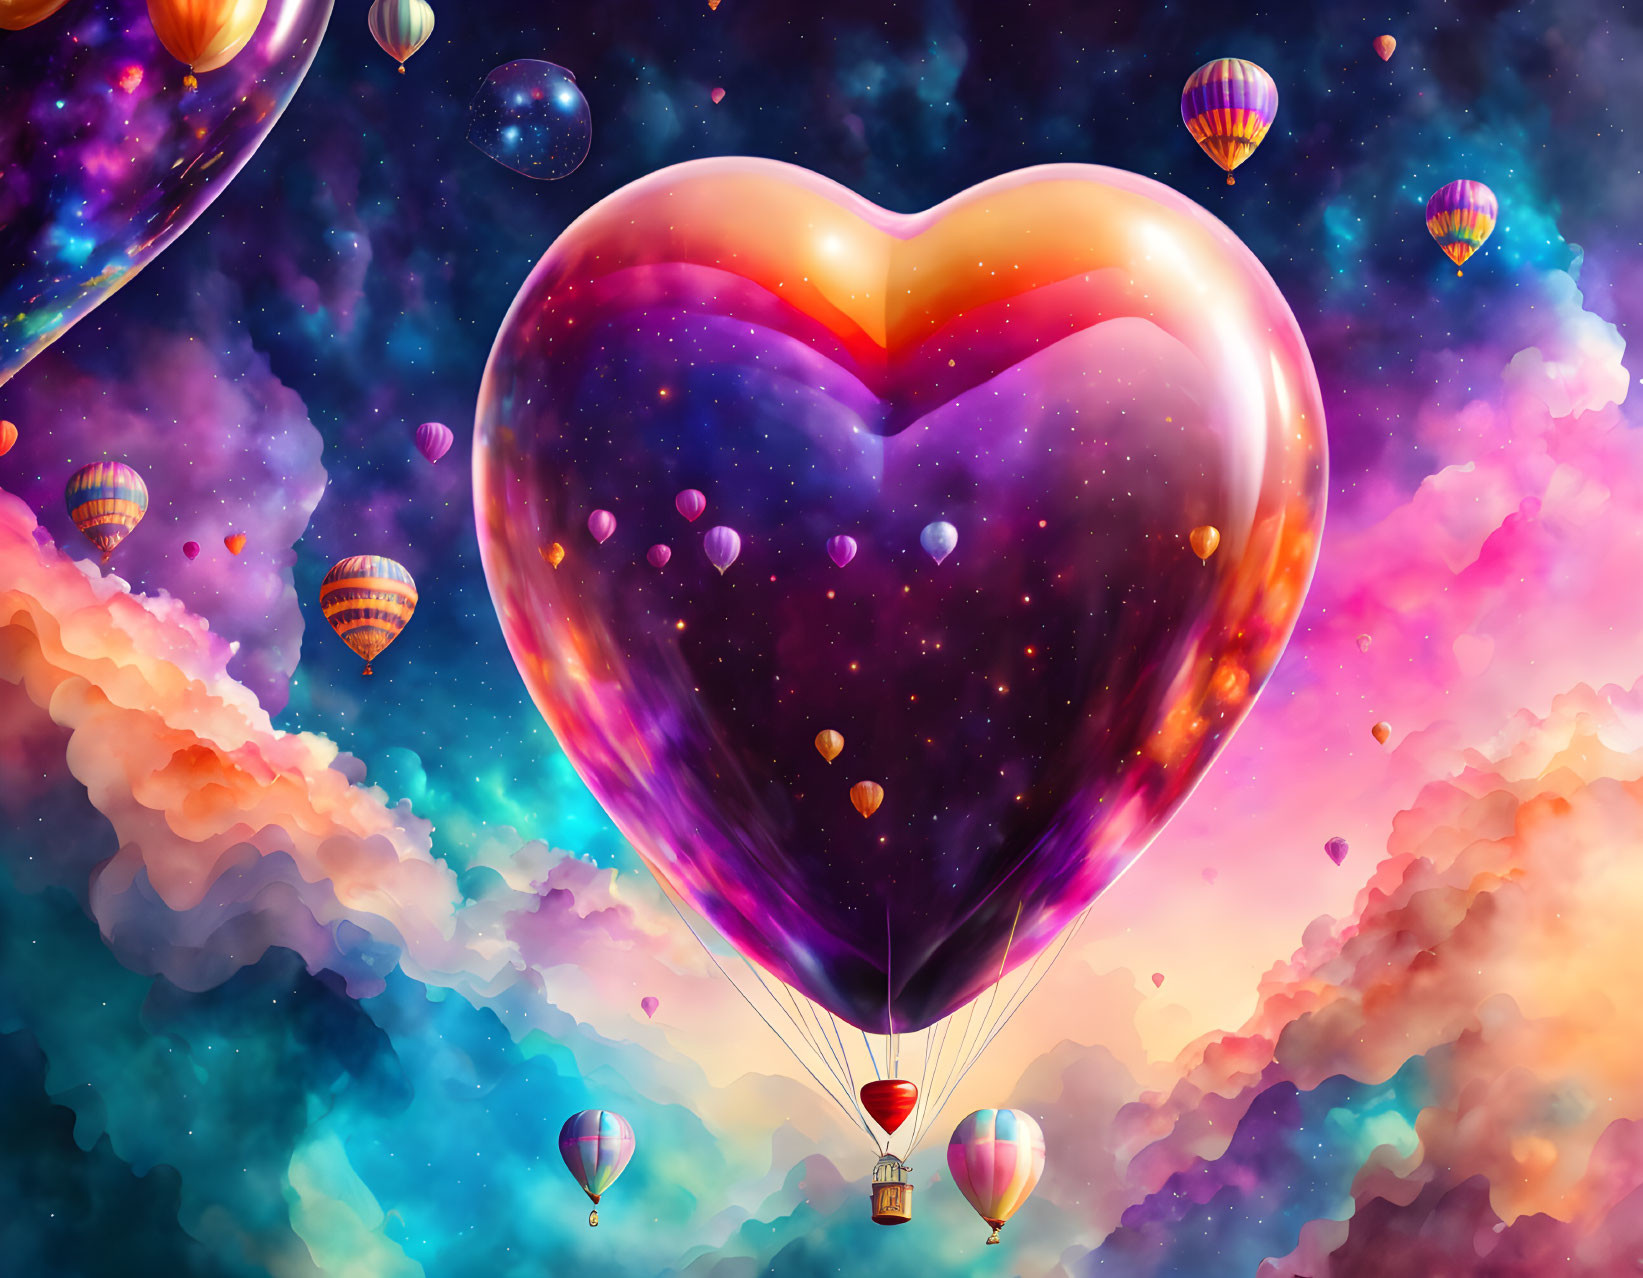 Colorful Heart-shaped Hot Air Balloon Soaring in Cosmic Sky